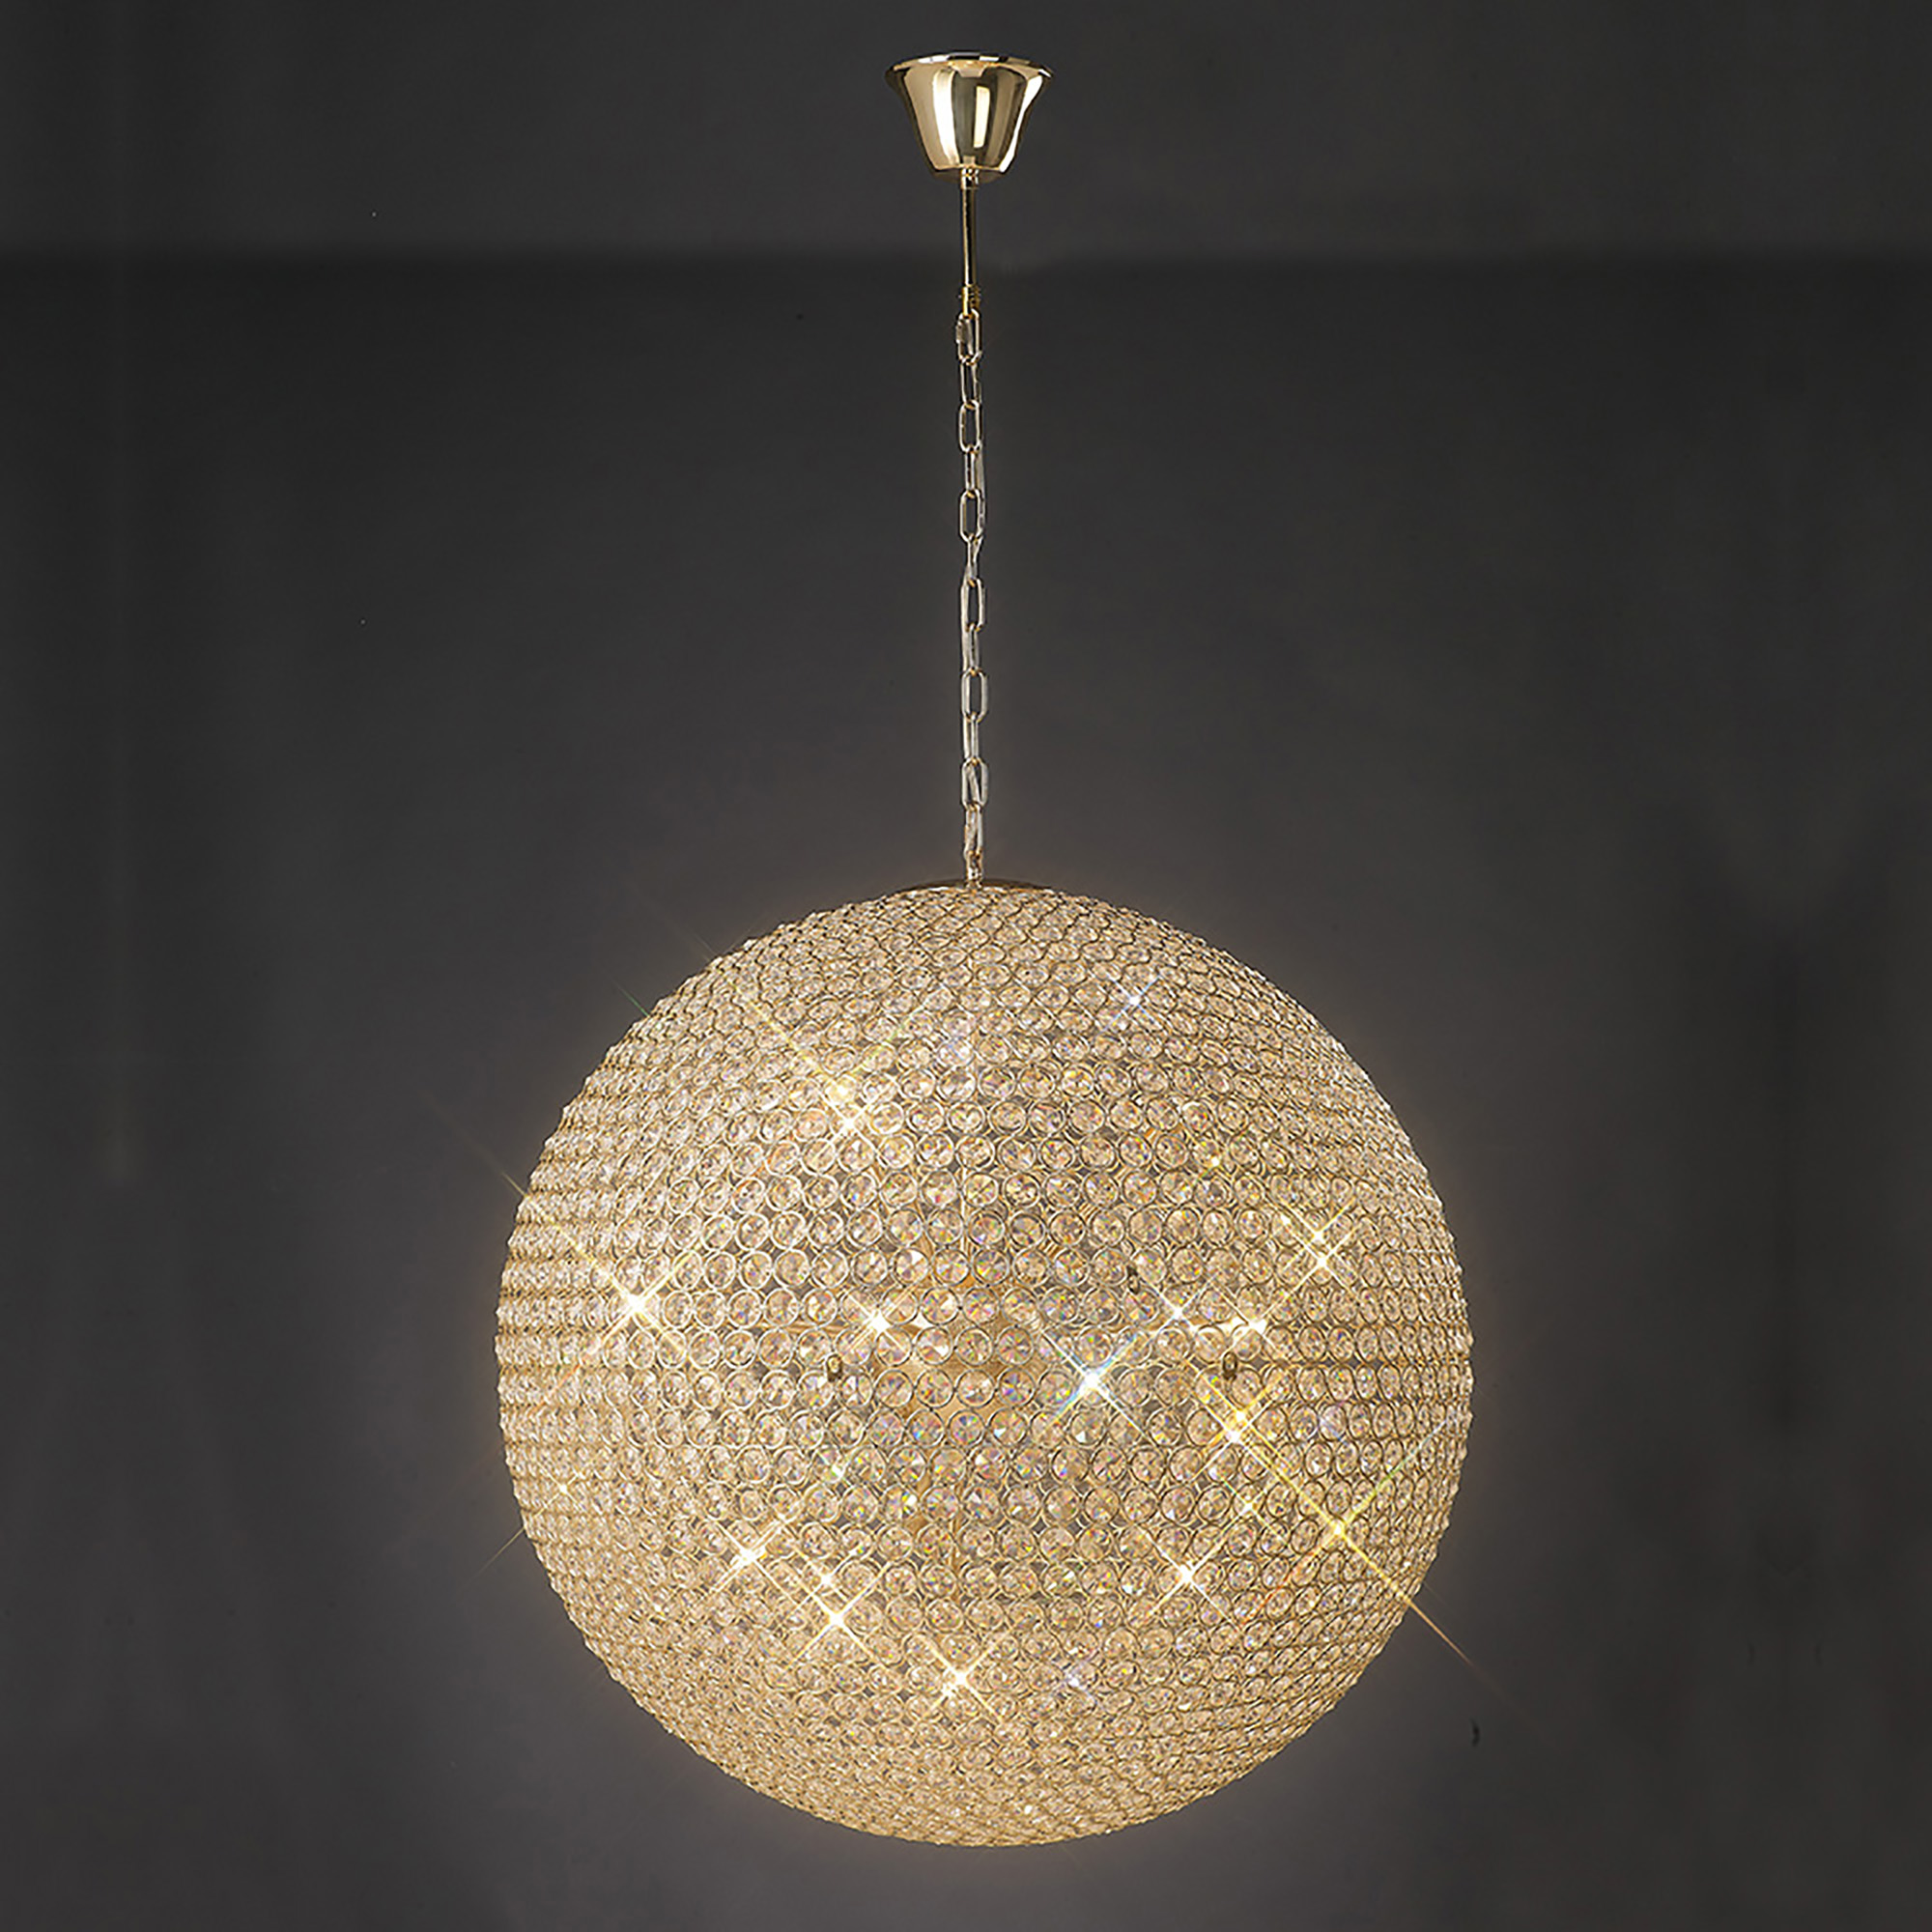 IL30750  Ava Crystal Pendant 12 Light (25.5kg) French Gold